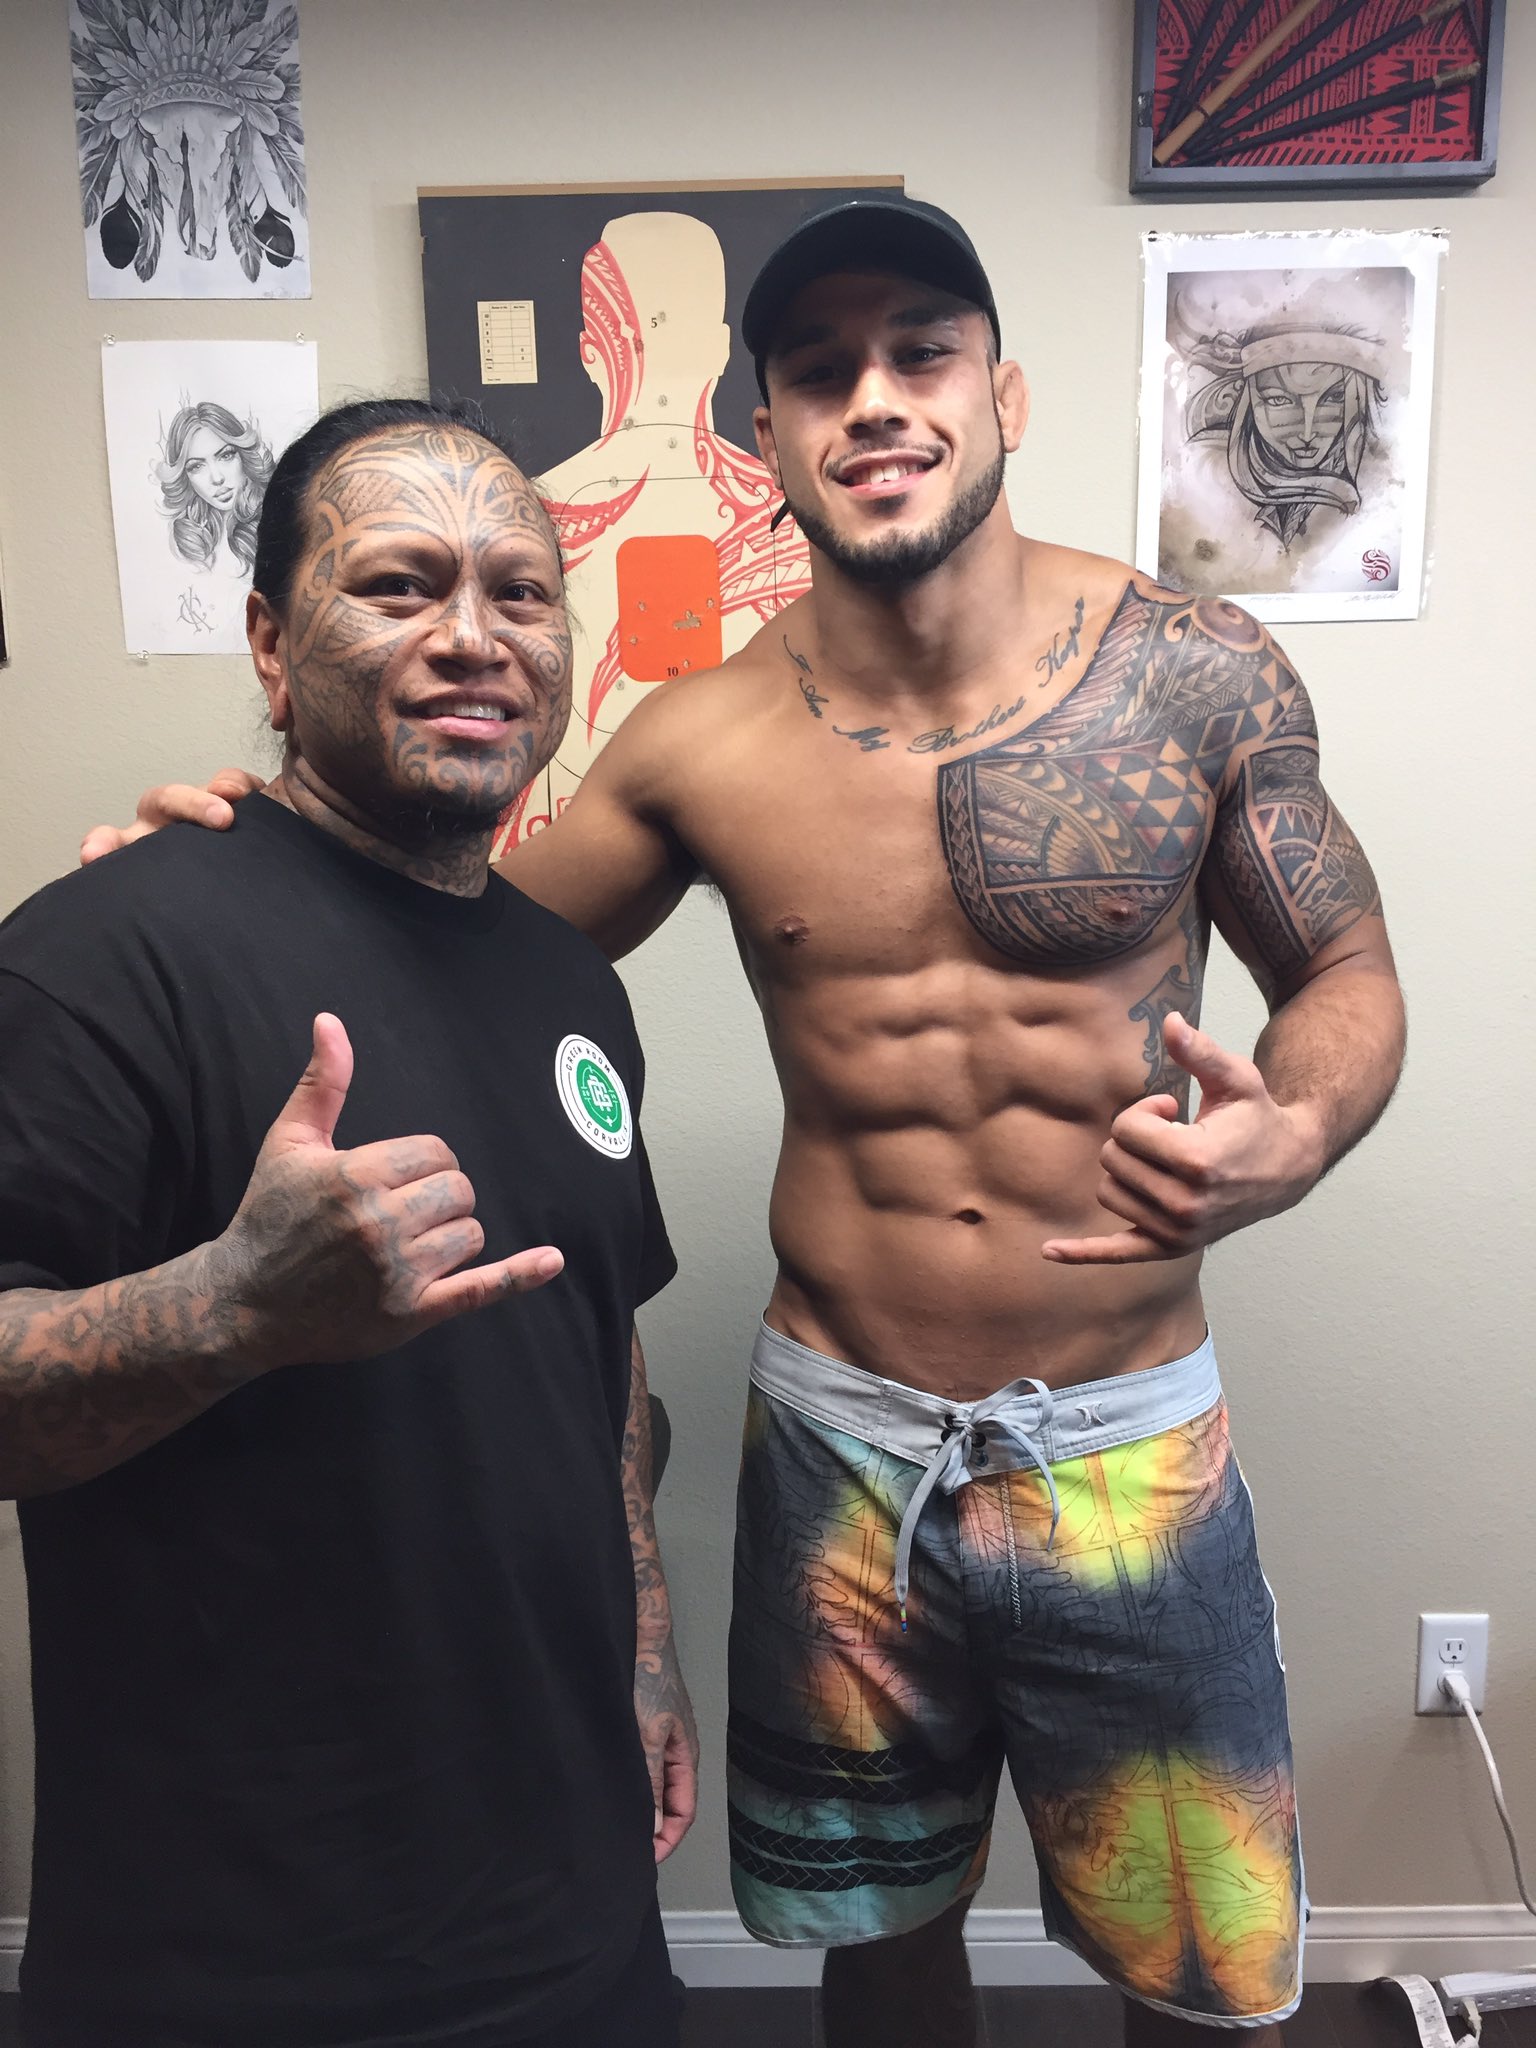 Brad Tavares on X: Just got some work done by @TattoosByBONG hit him up  for some sick Polynesian work! Tattoobong@yahoo.com   / X